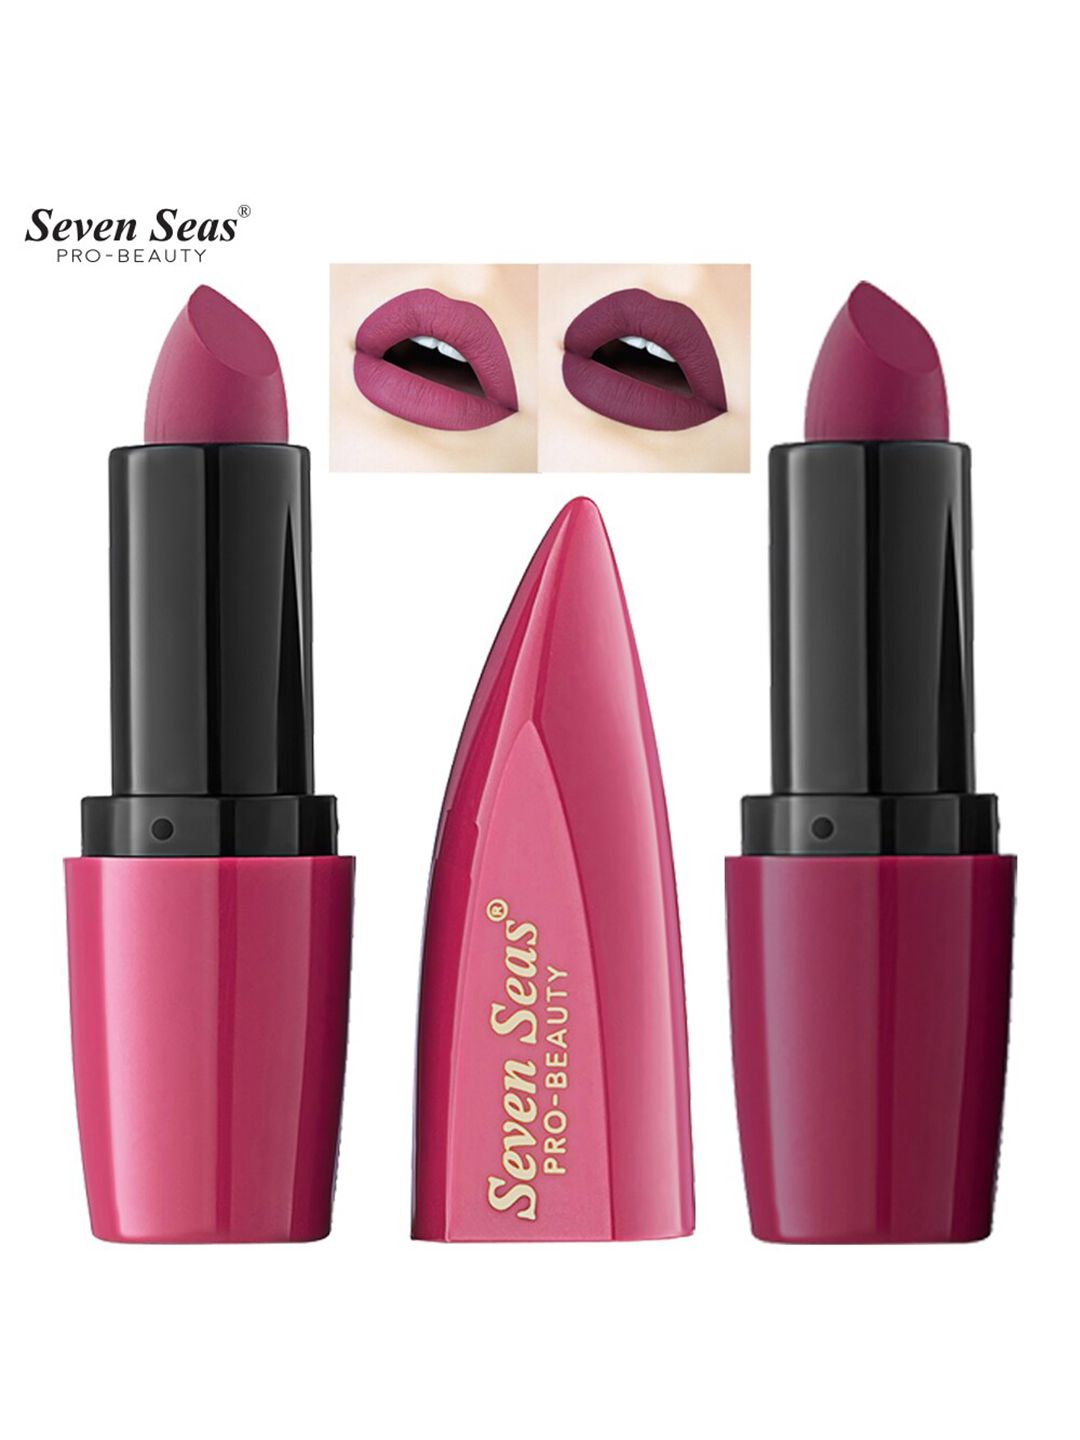 Seven Seas Pro-Beauty Set of 2 Ultimate Matte Lipsticks - Claret & Crown of Thorns Price in India